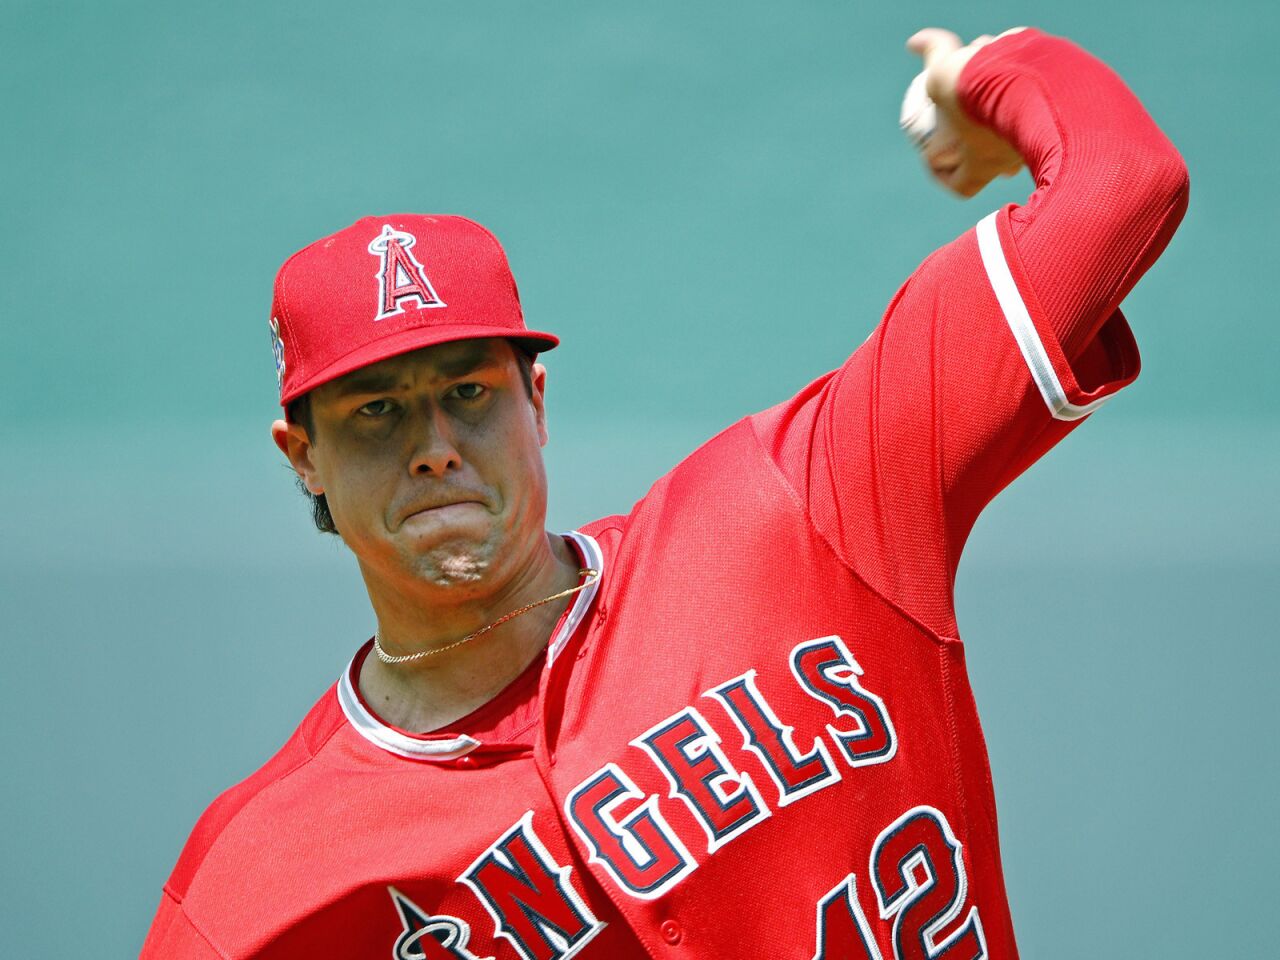 Pitcher Tyler Skaggs grew up an Angels fan in Santa Monica and joined the organization as a first-round draft pick. He battled injuries throughout his career but started 24 games last season and showed signs of dominance this year. He was 27.